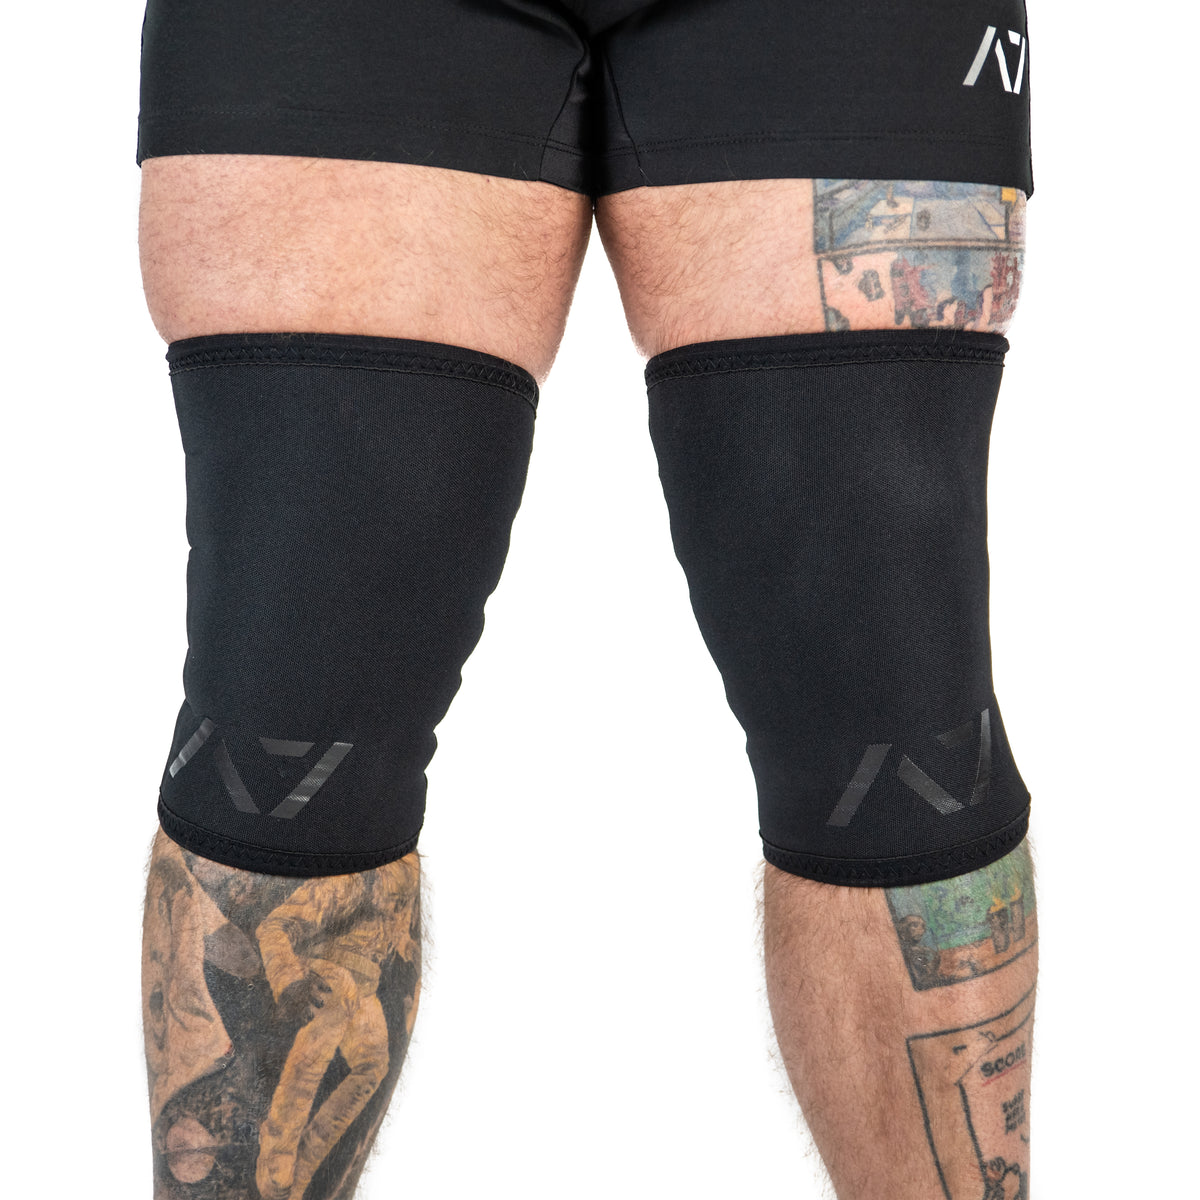 A7 Stealth Stiff Sleeves knee sleeves are structured with a downward cut panel on the back of the quad and calf to ensure these have the ultimate compression at the knee joint. The A7 CONE Gold Standard Stiff Knee Sleeves are IPF approved and are allowed in all IPF competitions and affiliate federations like the European Powerlifting Federation and all federations across Europe. . A7 Stealth Stiff Sleeves knee sleeves are IPF Approved Kit. A7 UK shipping to UK and Europe.